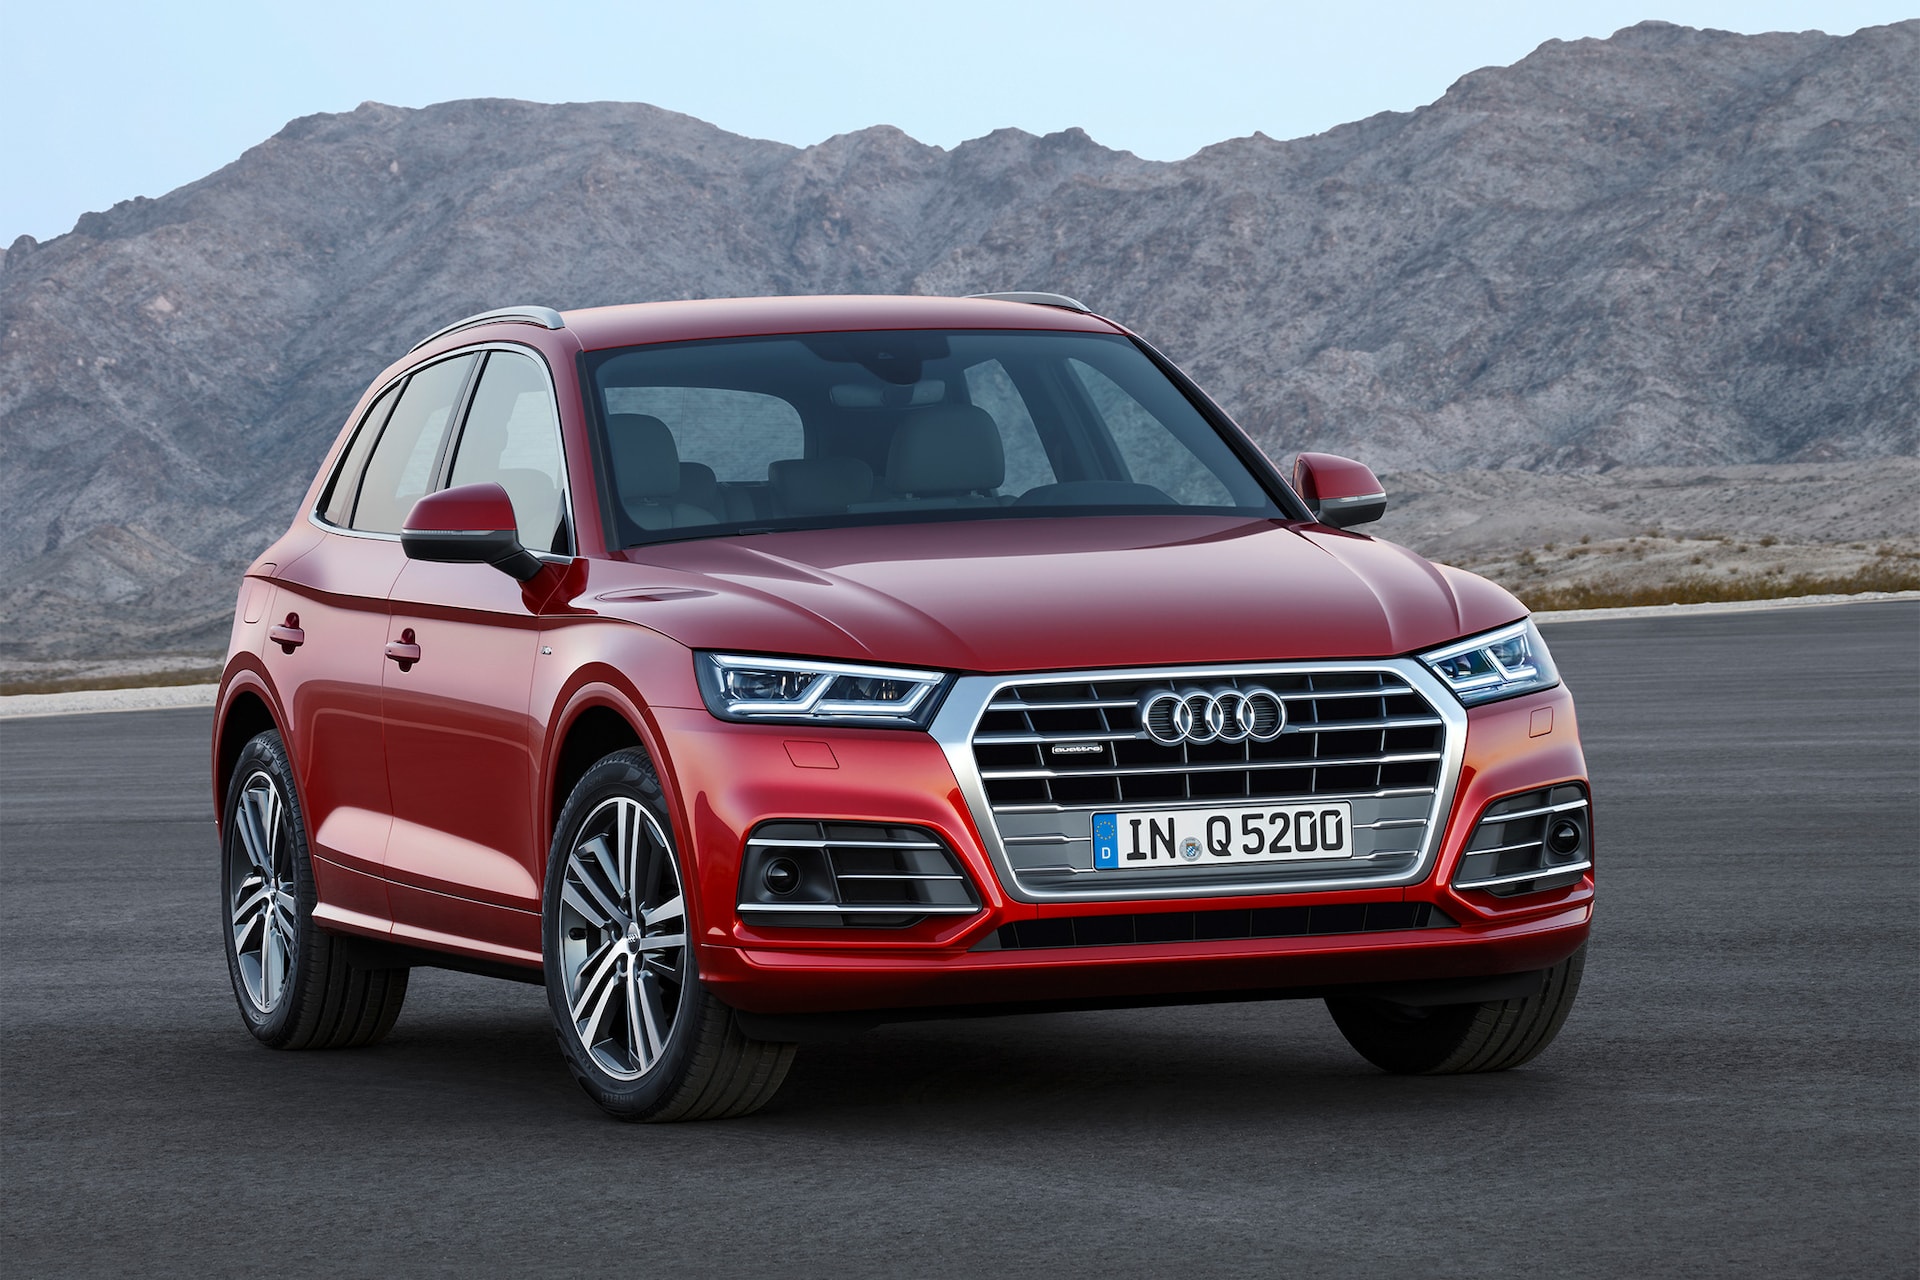 2018 Audi Q5 Prices, Reviews, and Photos - MotorTrend